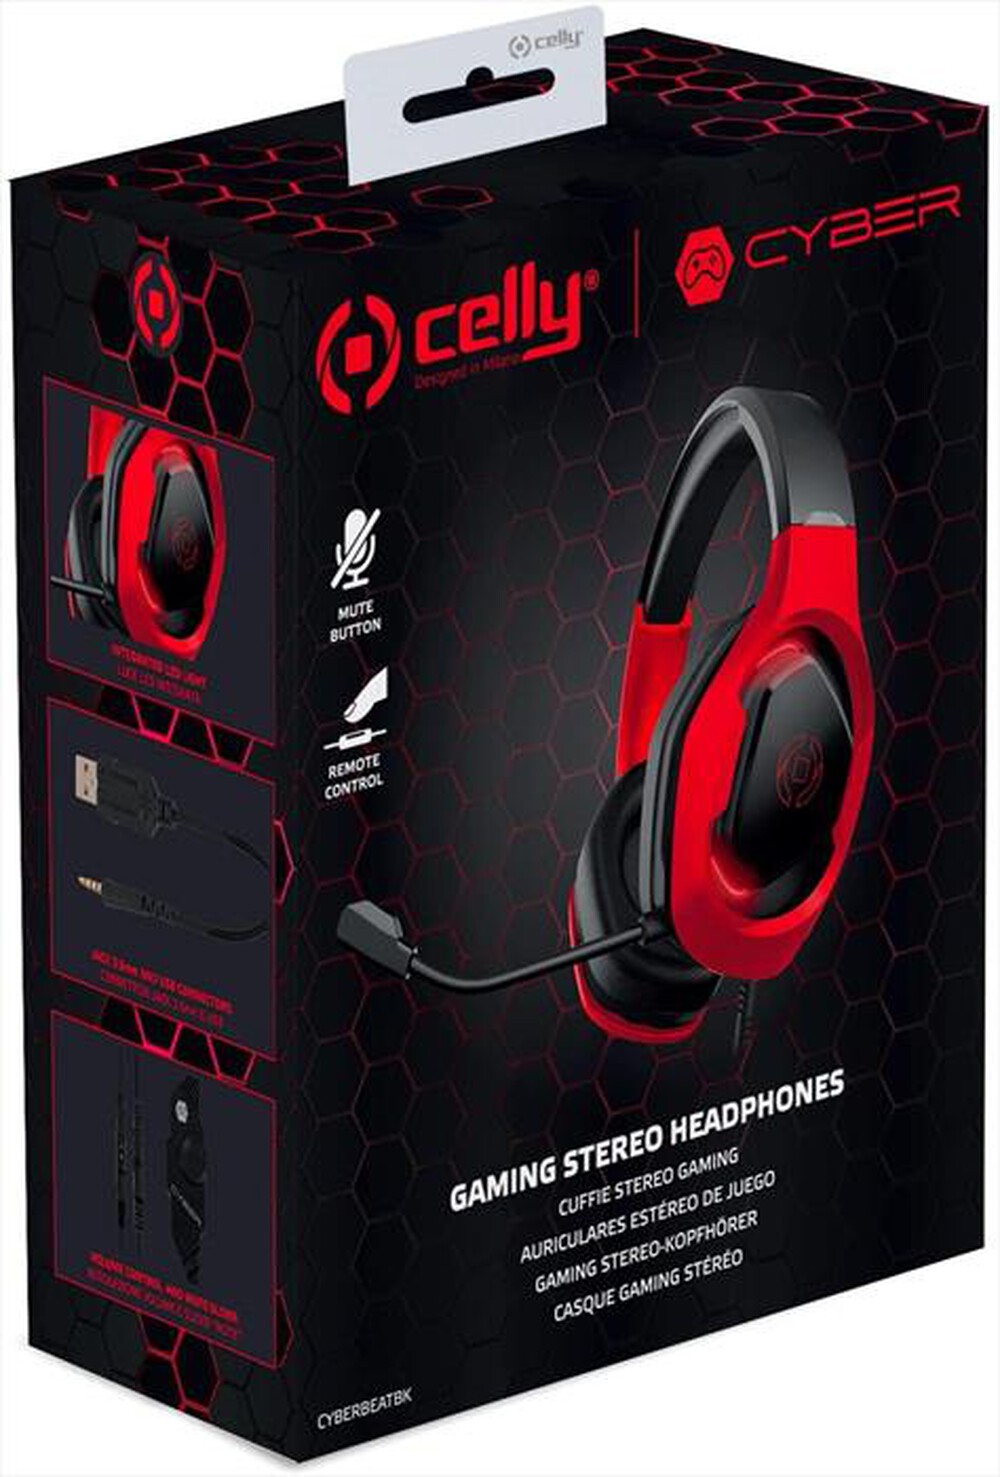 "CELLY - VDGCLY88681-Nero/Rosso"